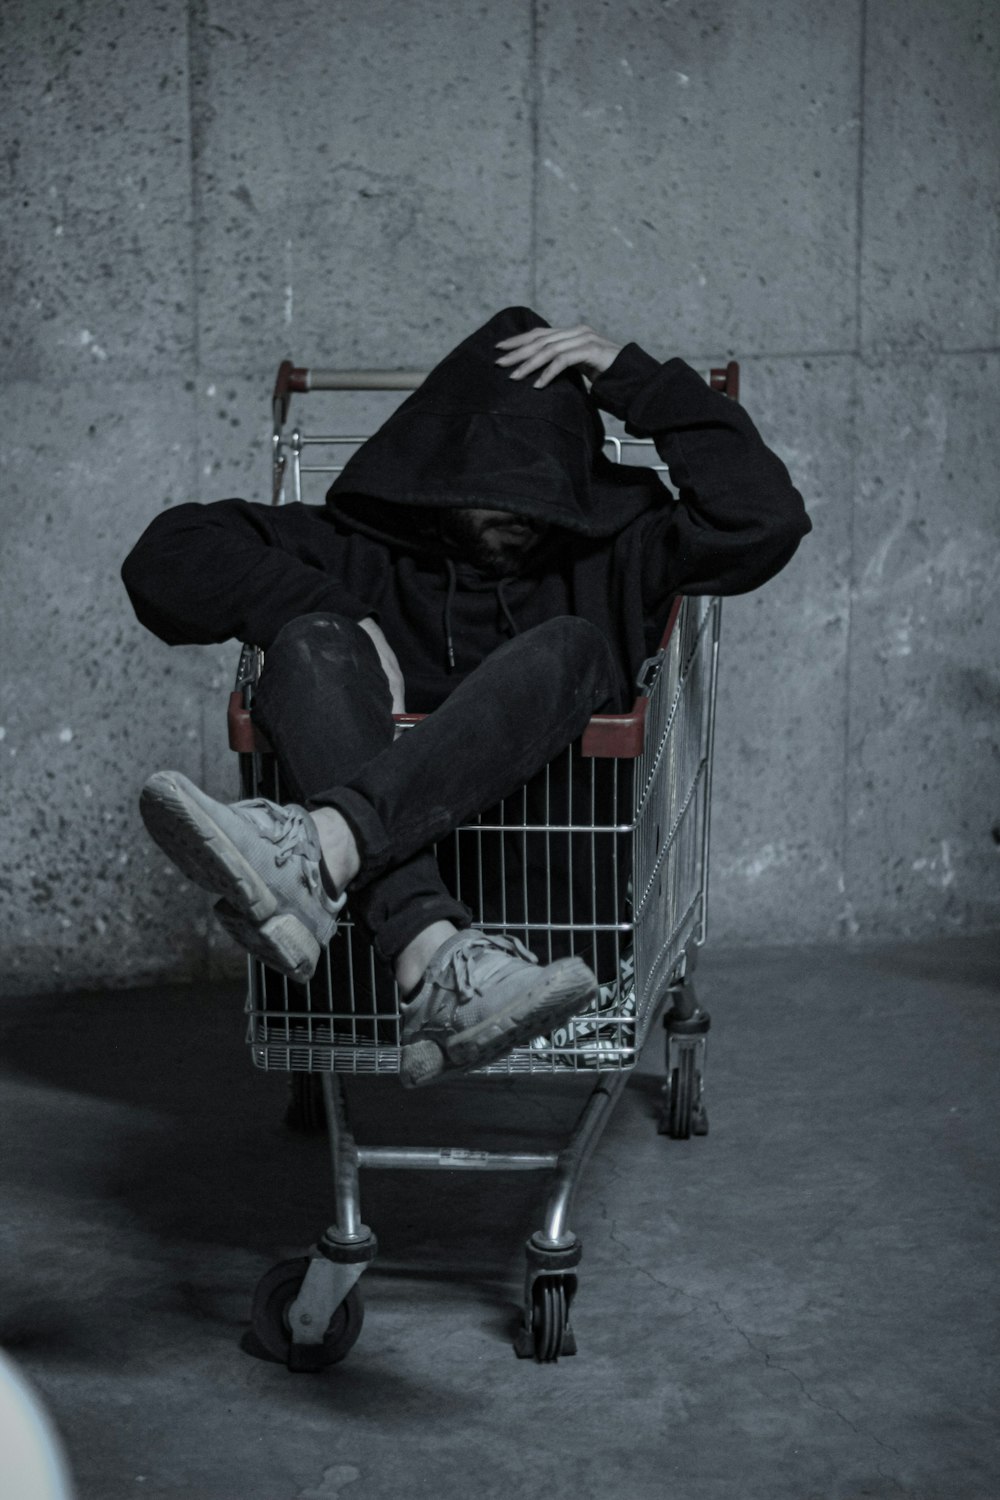 a man is sitting in a shopping cart